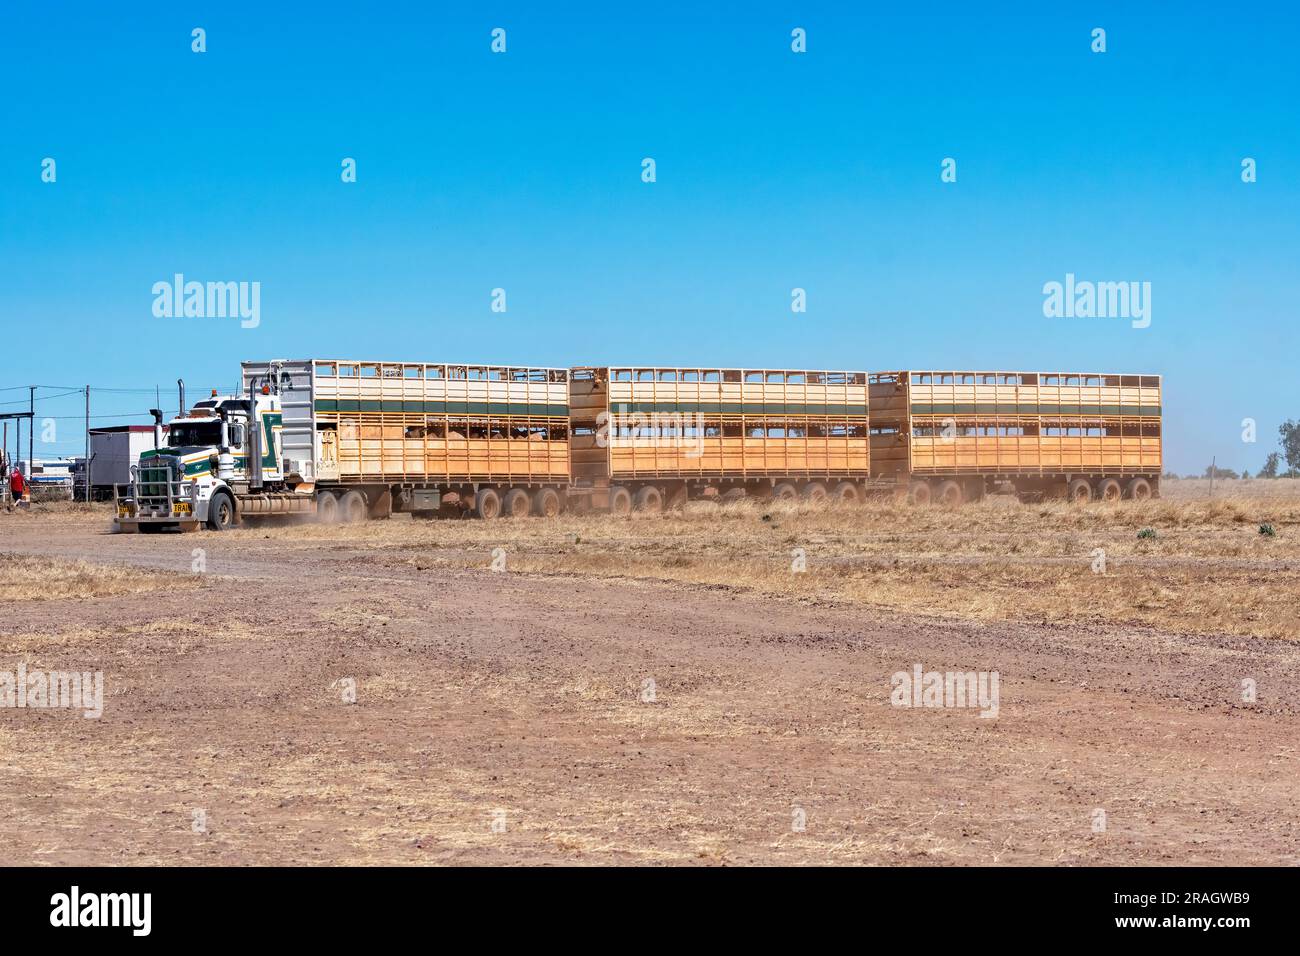 Cattle Truck with three trailers, Brunette Downs Cattle Station, Barkly Tablelands, Northern Territory, NT, Australia Stock Photo